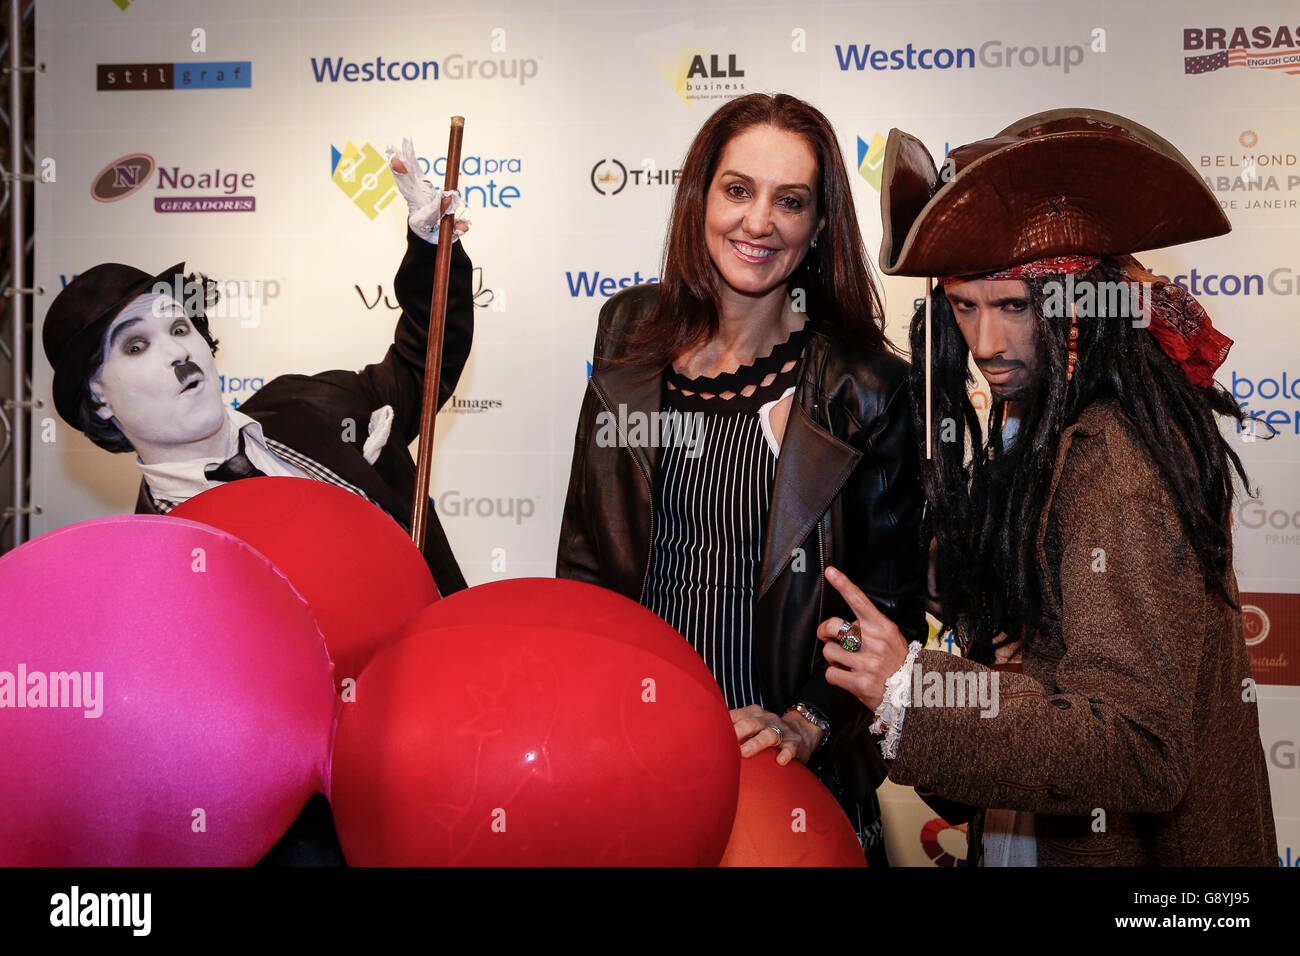 RIO DE JANEIRO, Brazil - 06/29/2016: SOLIDARITY DINNER BALL FORWARD - Former volleyball player Fernanda Venturini between Chaplin and Jack Sparrow for Dinner Solidarity held annually with the aim of raising funds for the Institute Bola Pra Frente. (Photo: Andr? Horta / FotoArena) Stock Photo